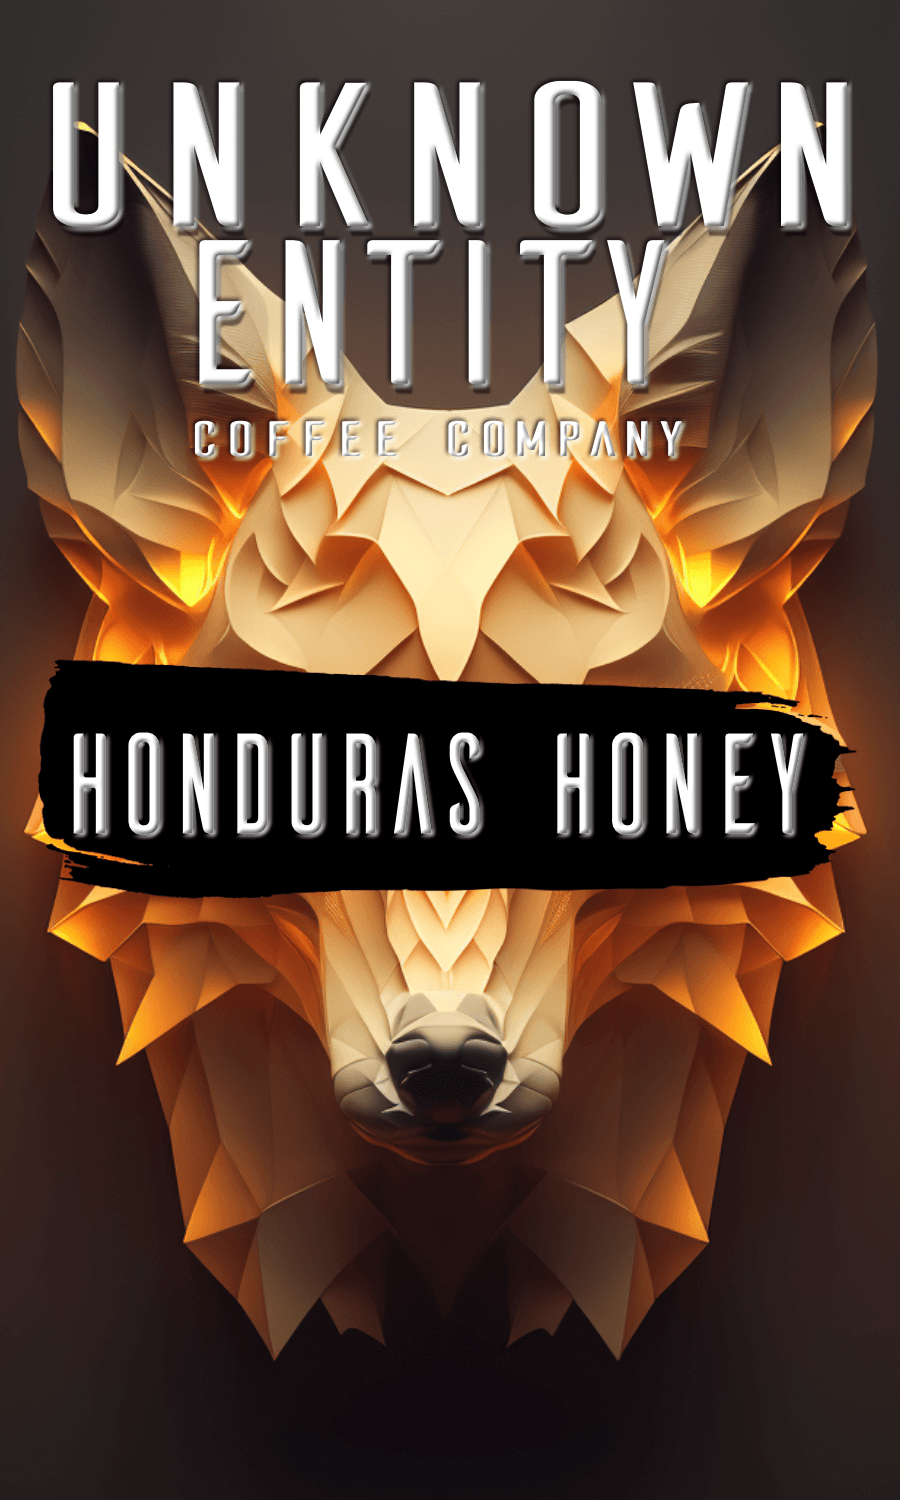 Honduras Honey Organic-Unknown Entity Coffee-coffee,coffee beans,honey process,New,pulped natural,roasted coffee,single origin,subscription,Unknown Entity,whole bean